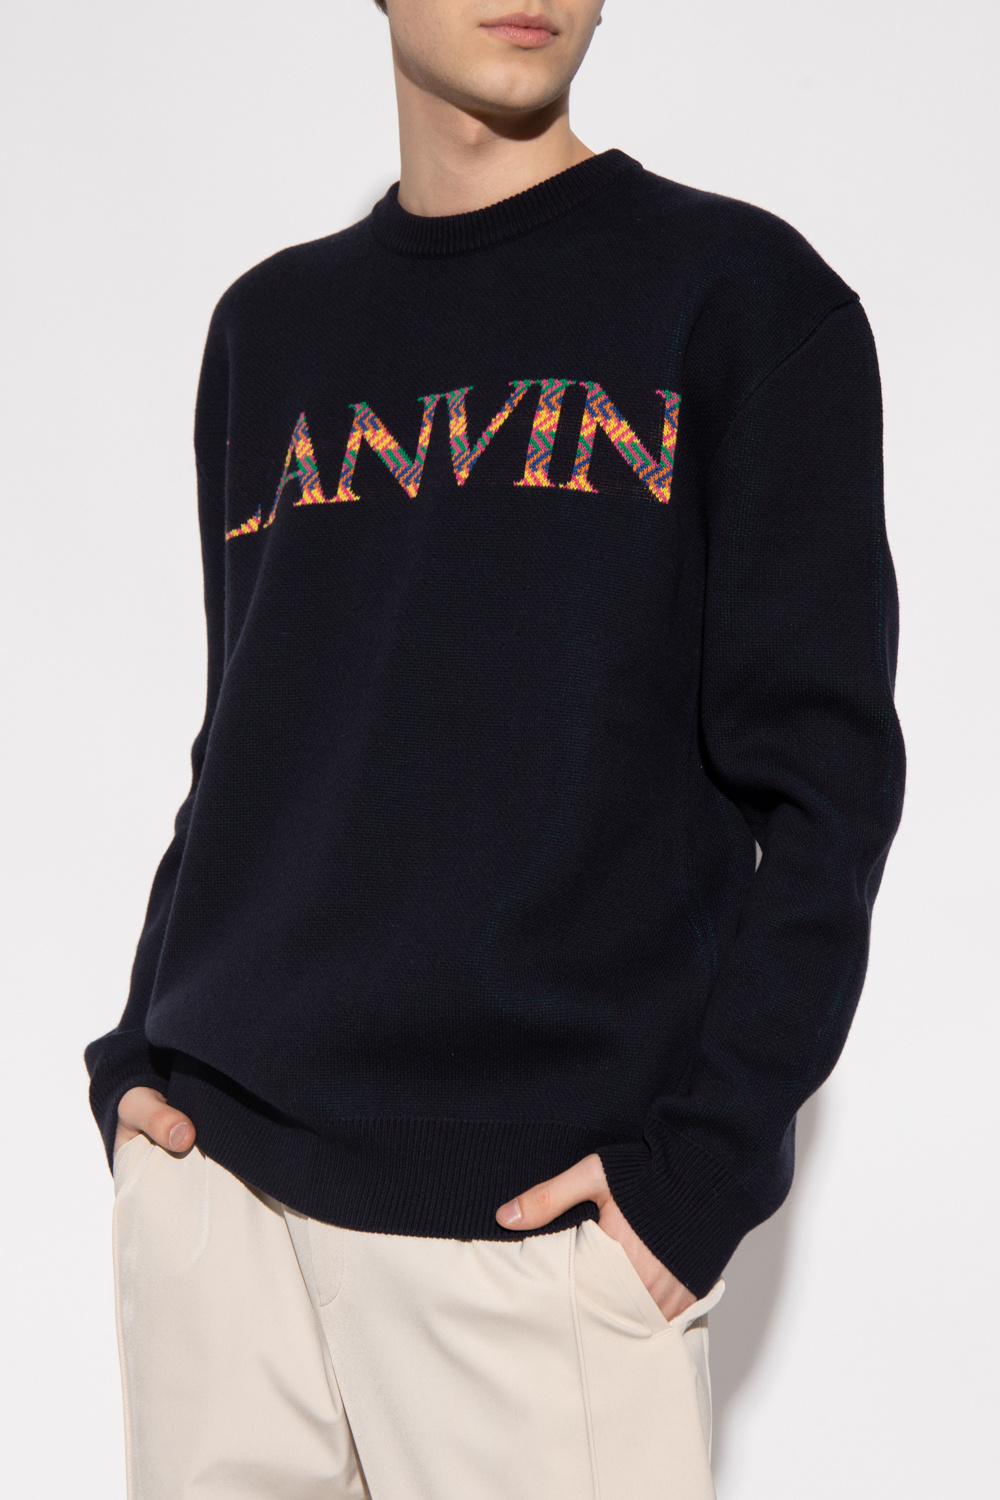 Lanvin Discover the most desirable